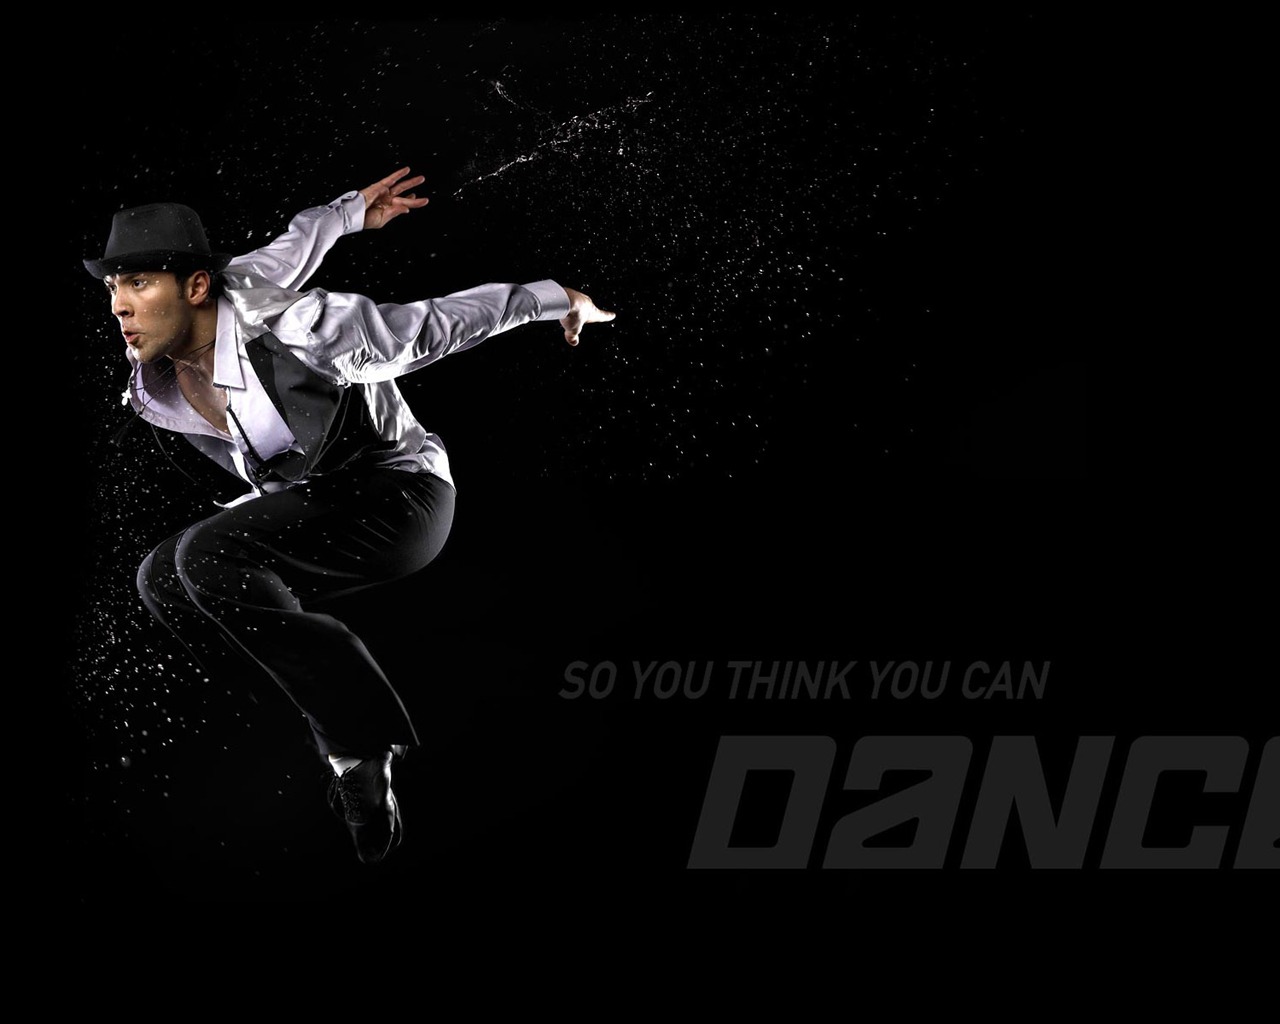 So You Think You Can Dance 舞林争霸 壁纸(一)12 - 1280x1024